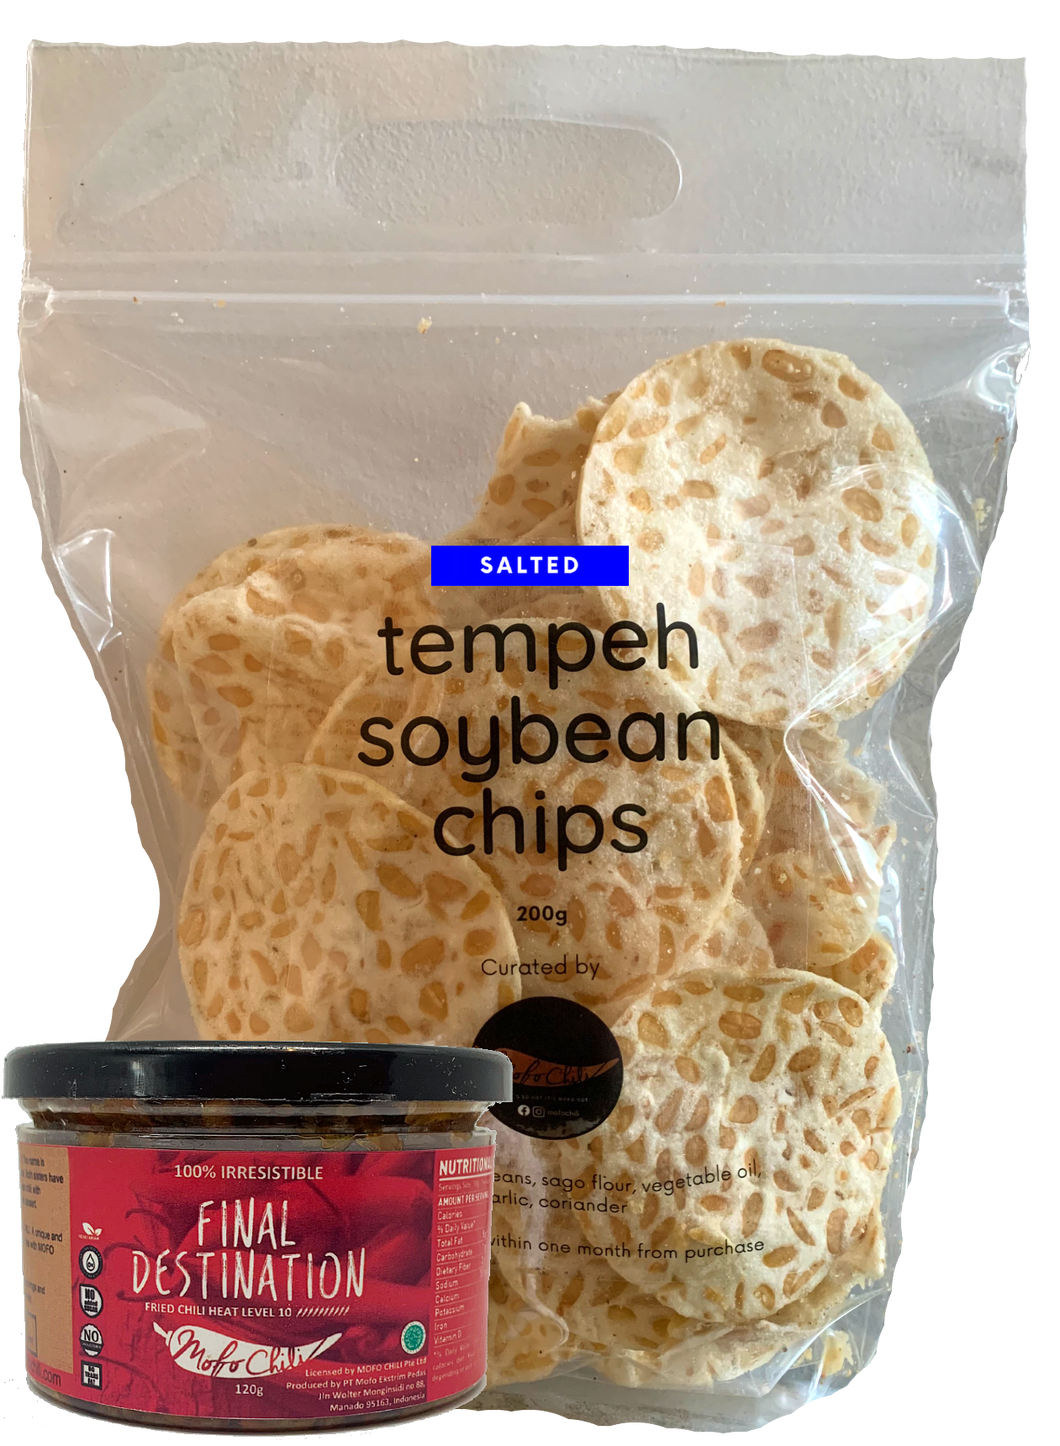 Dipping Snacks Bundle (Fried chili + Tempeh Soybean Chips)